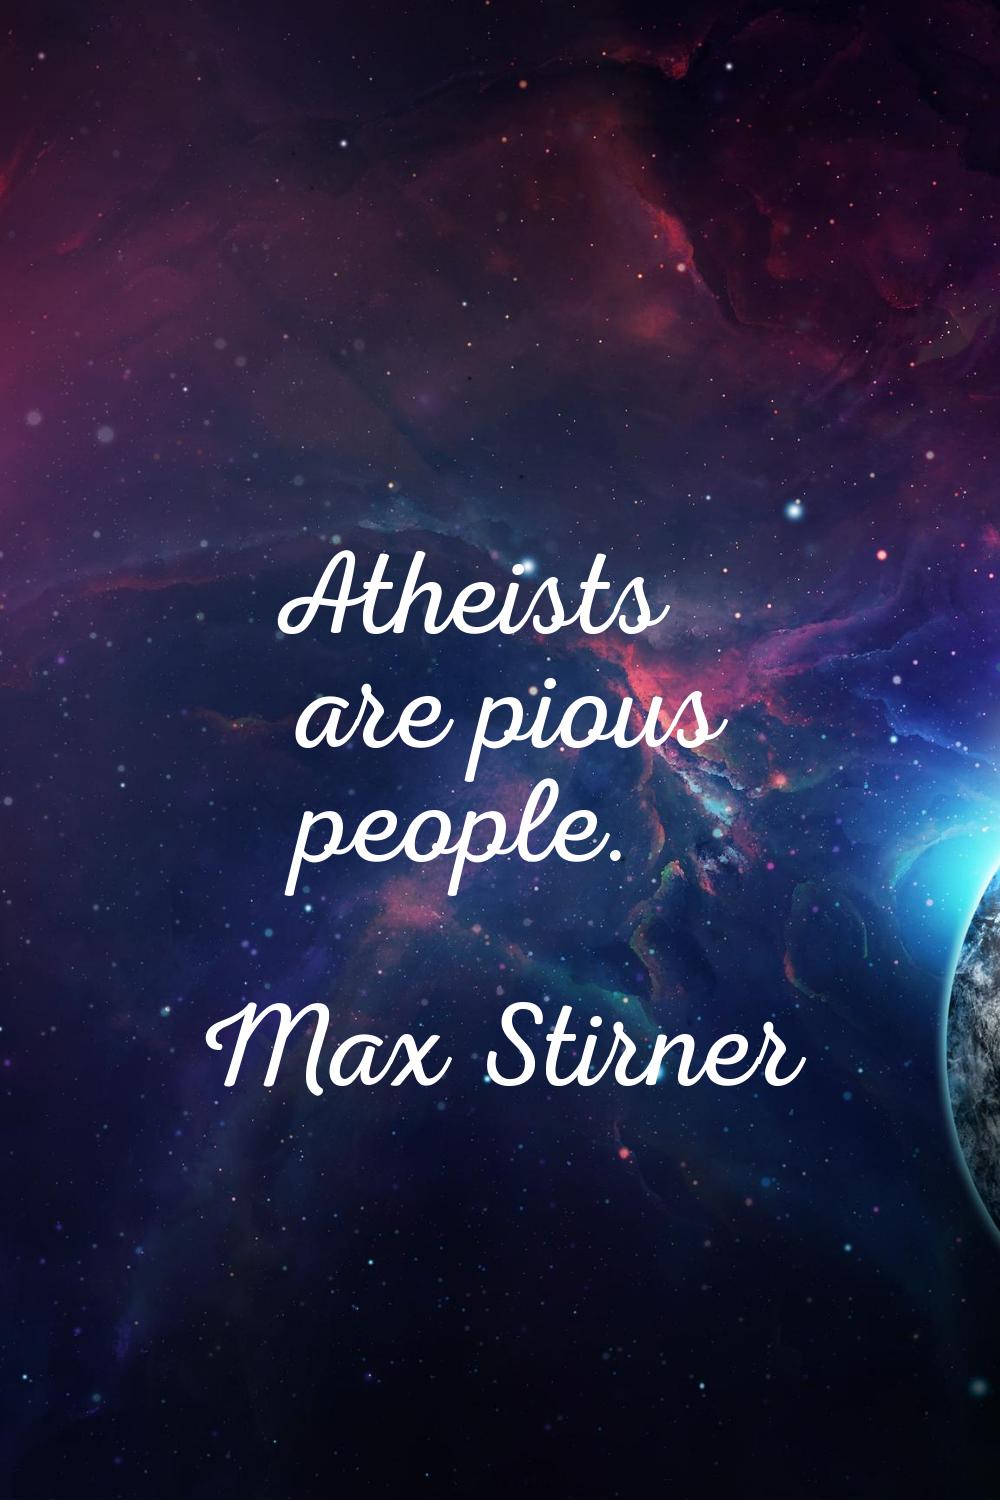 Atheists are pious people.